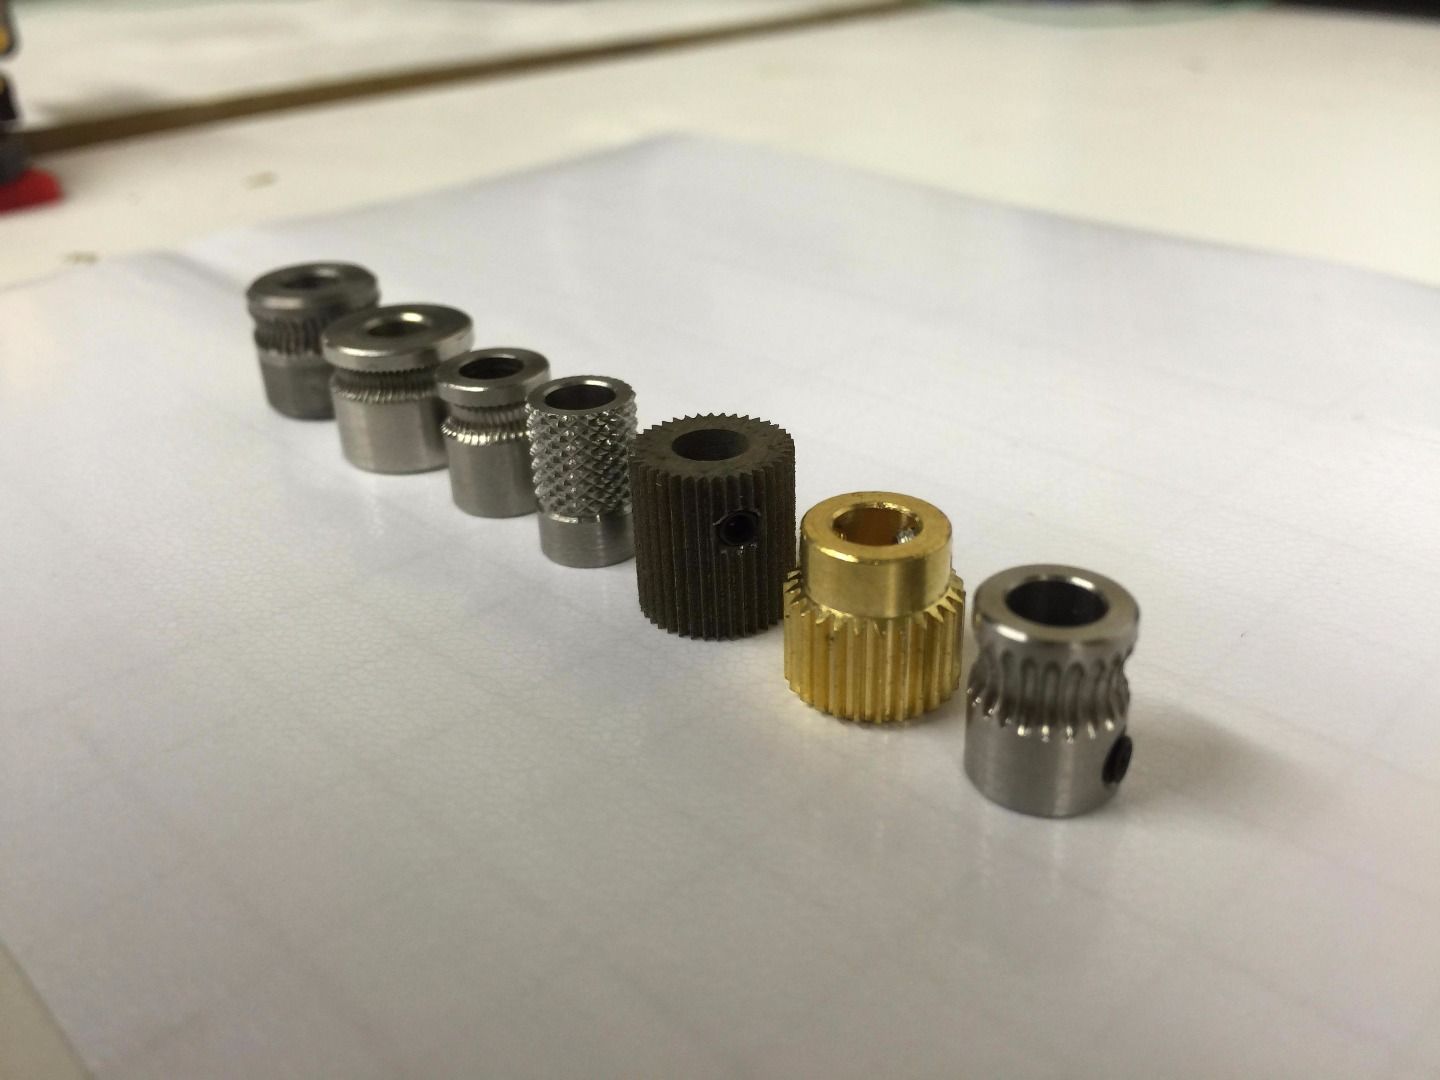 Multiple extruder wheels showing the difference between teeth patterns.